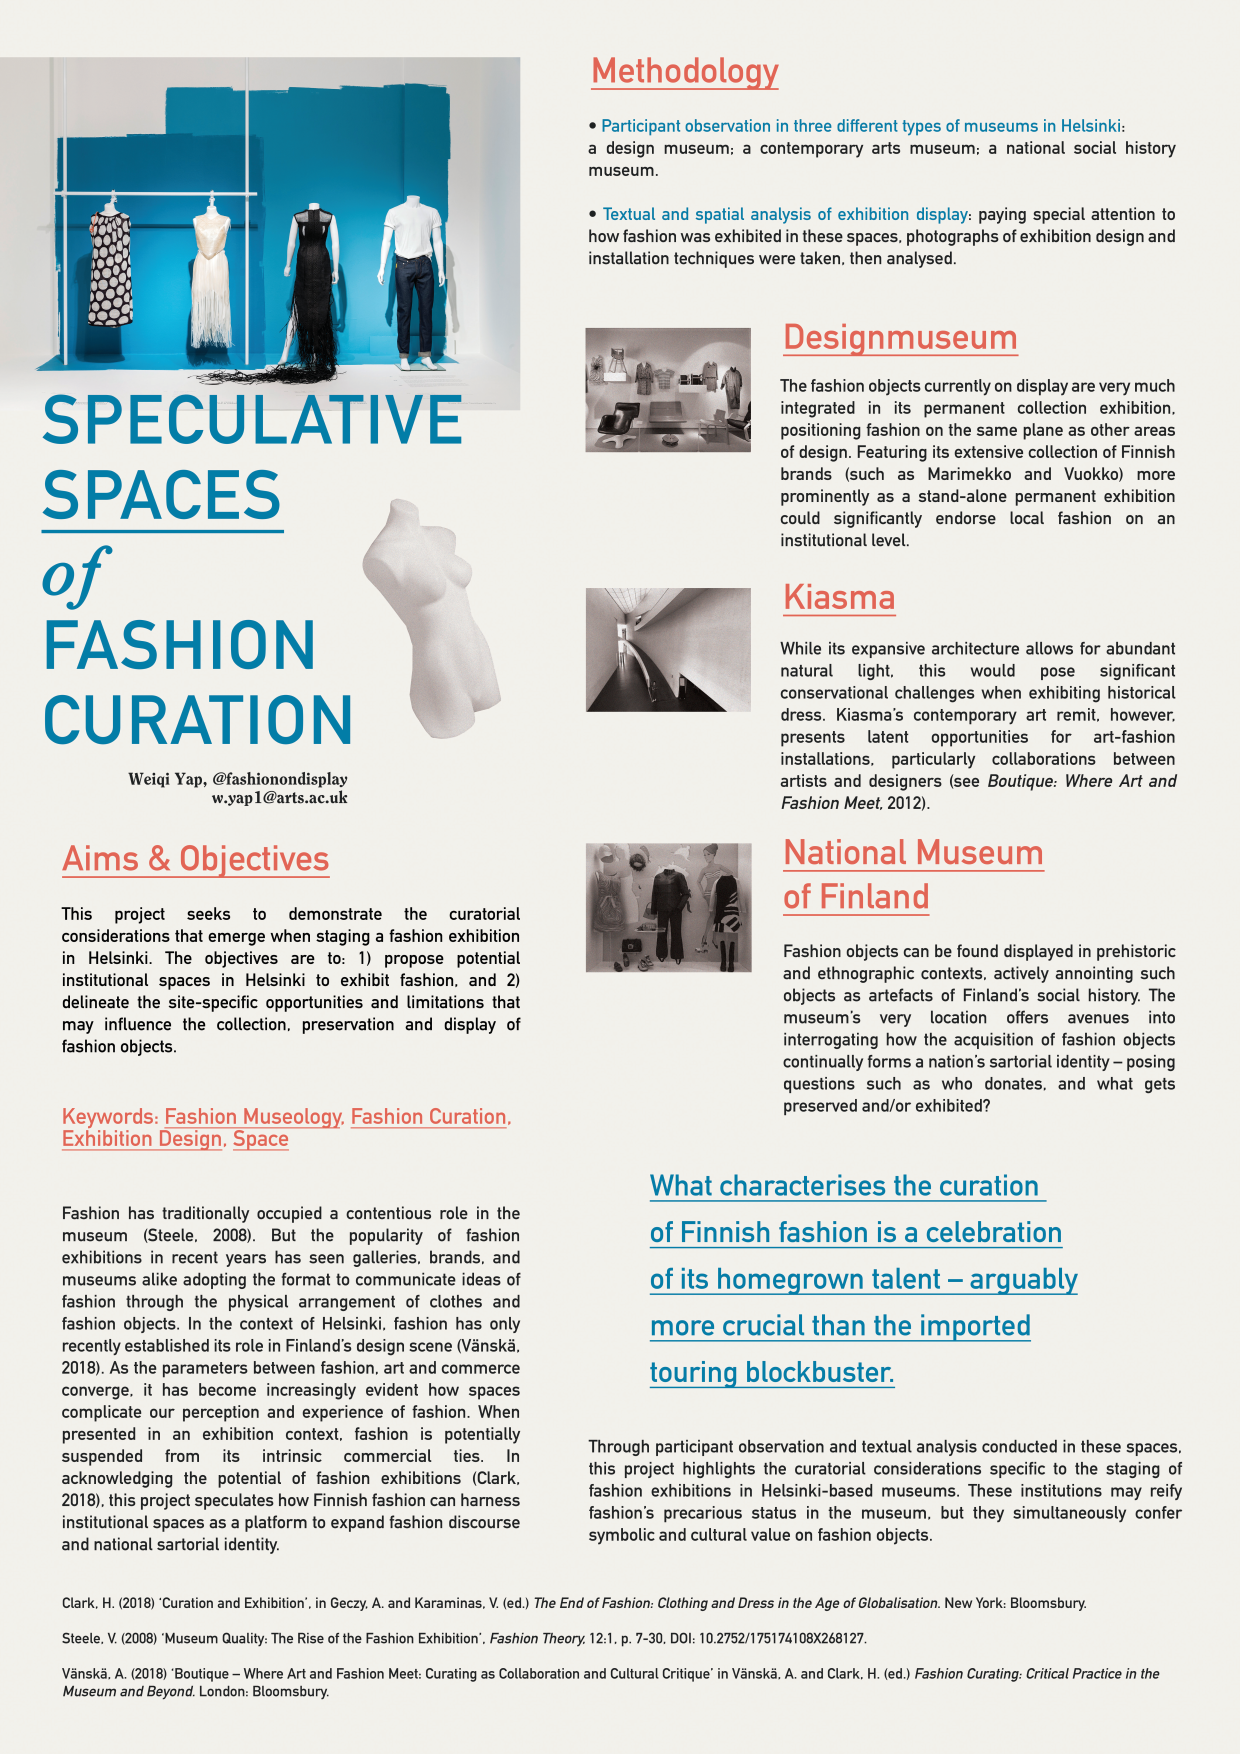 Speculative spaces of fashion curation –poster